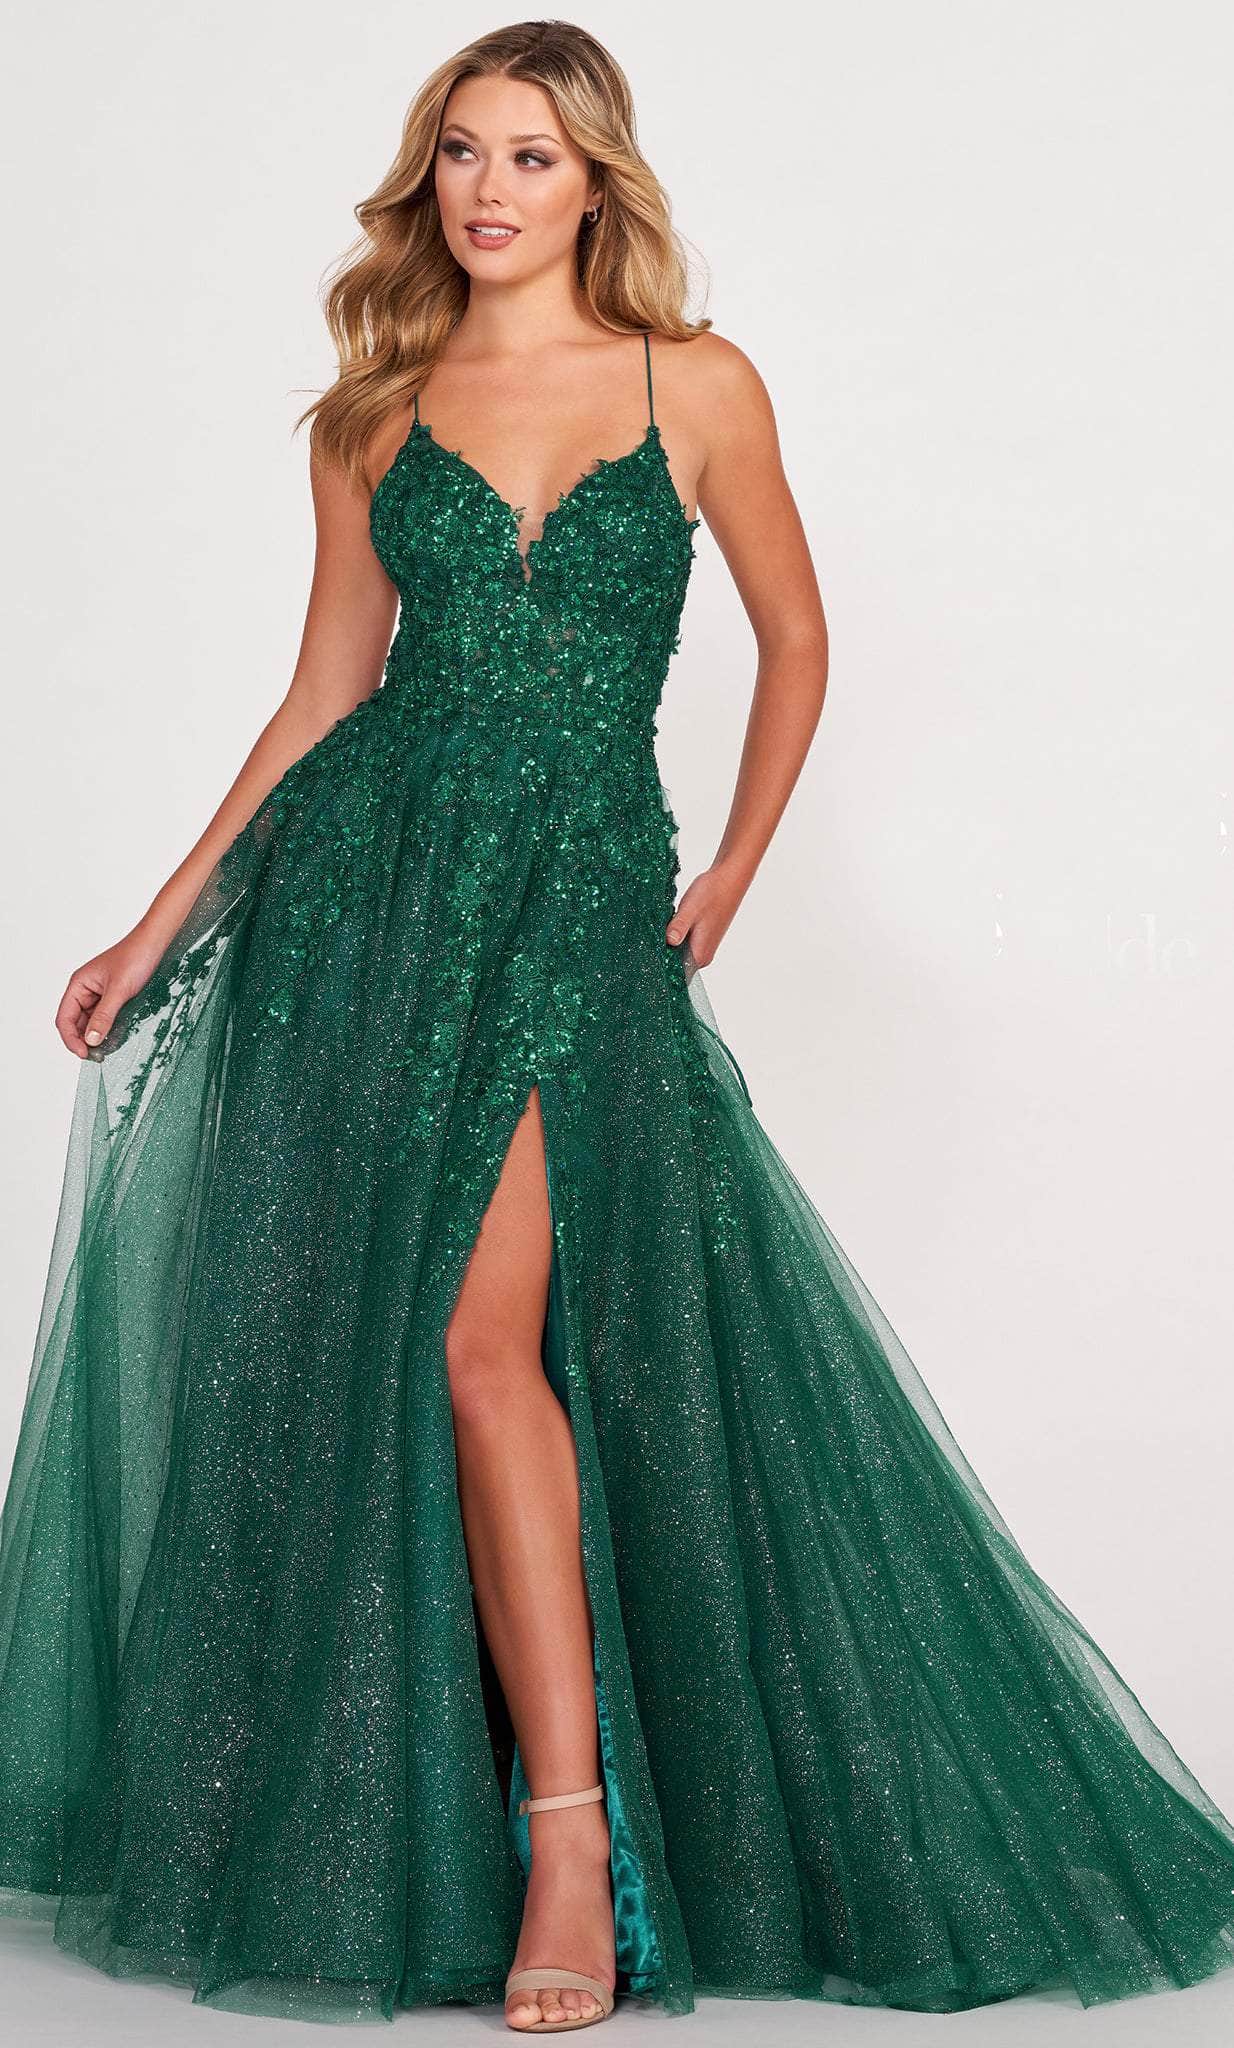 Ellie Wilde EW34053 - Sequined Glitter Tulle A-line Prom Gown Prom Dresses 00 / Emerald